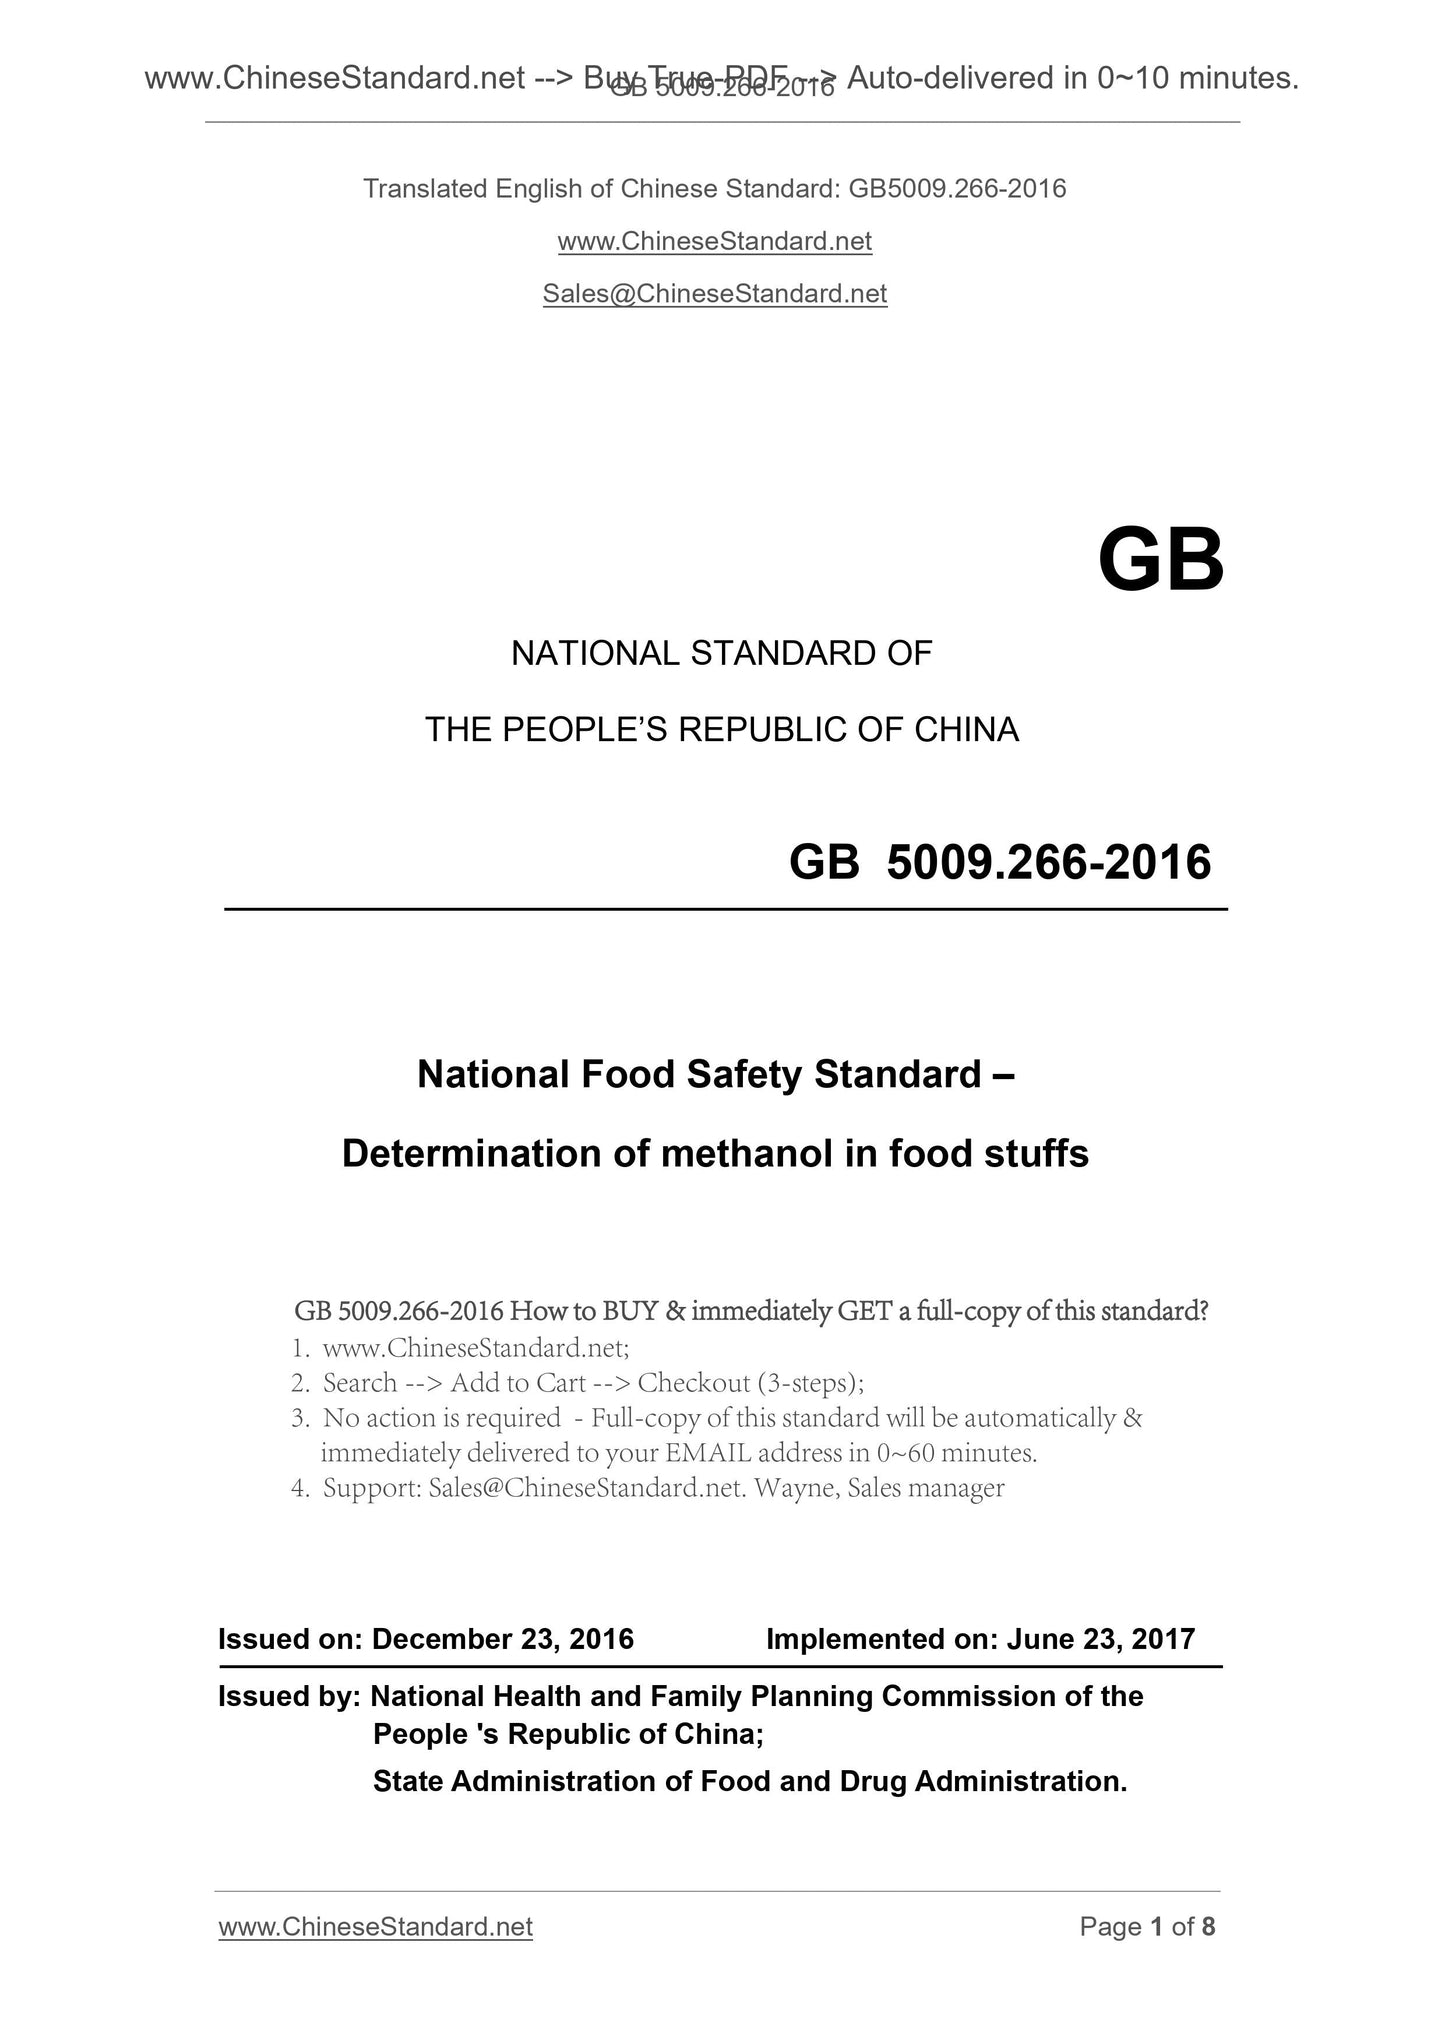 GB 5009.266-2016 Page 1